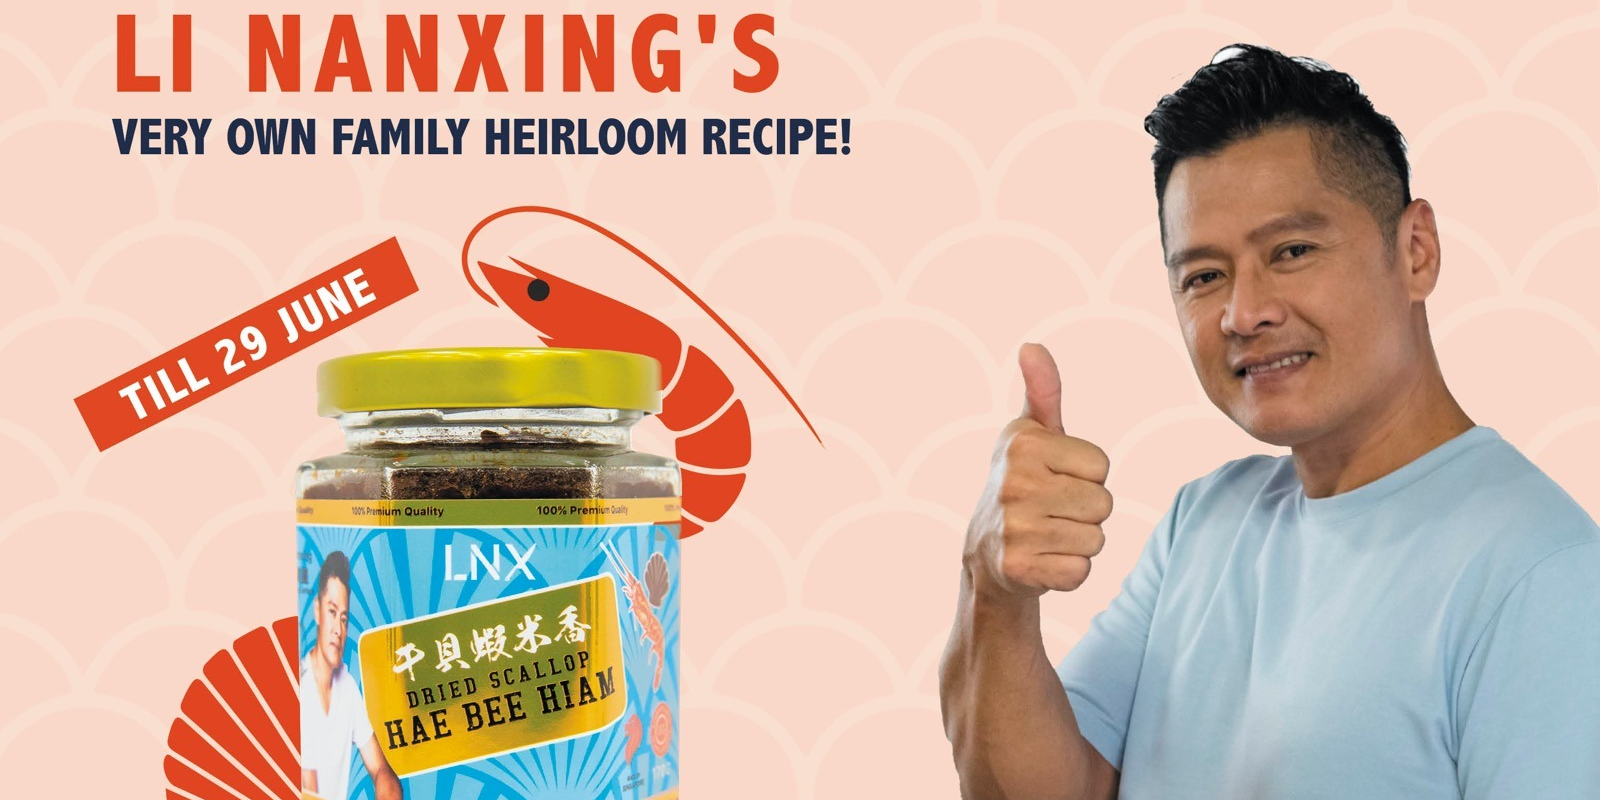 Grab Ah Ge’s Dried Scallop Hae Bee Hiam at a never seen before price of $12.80!